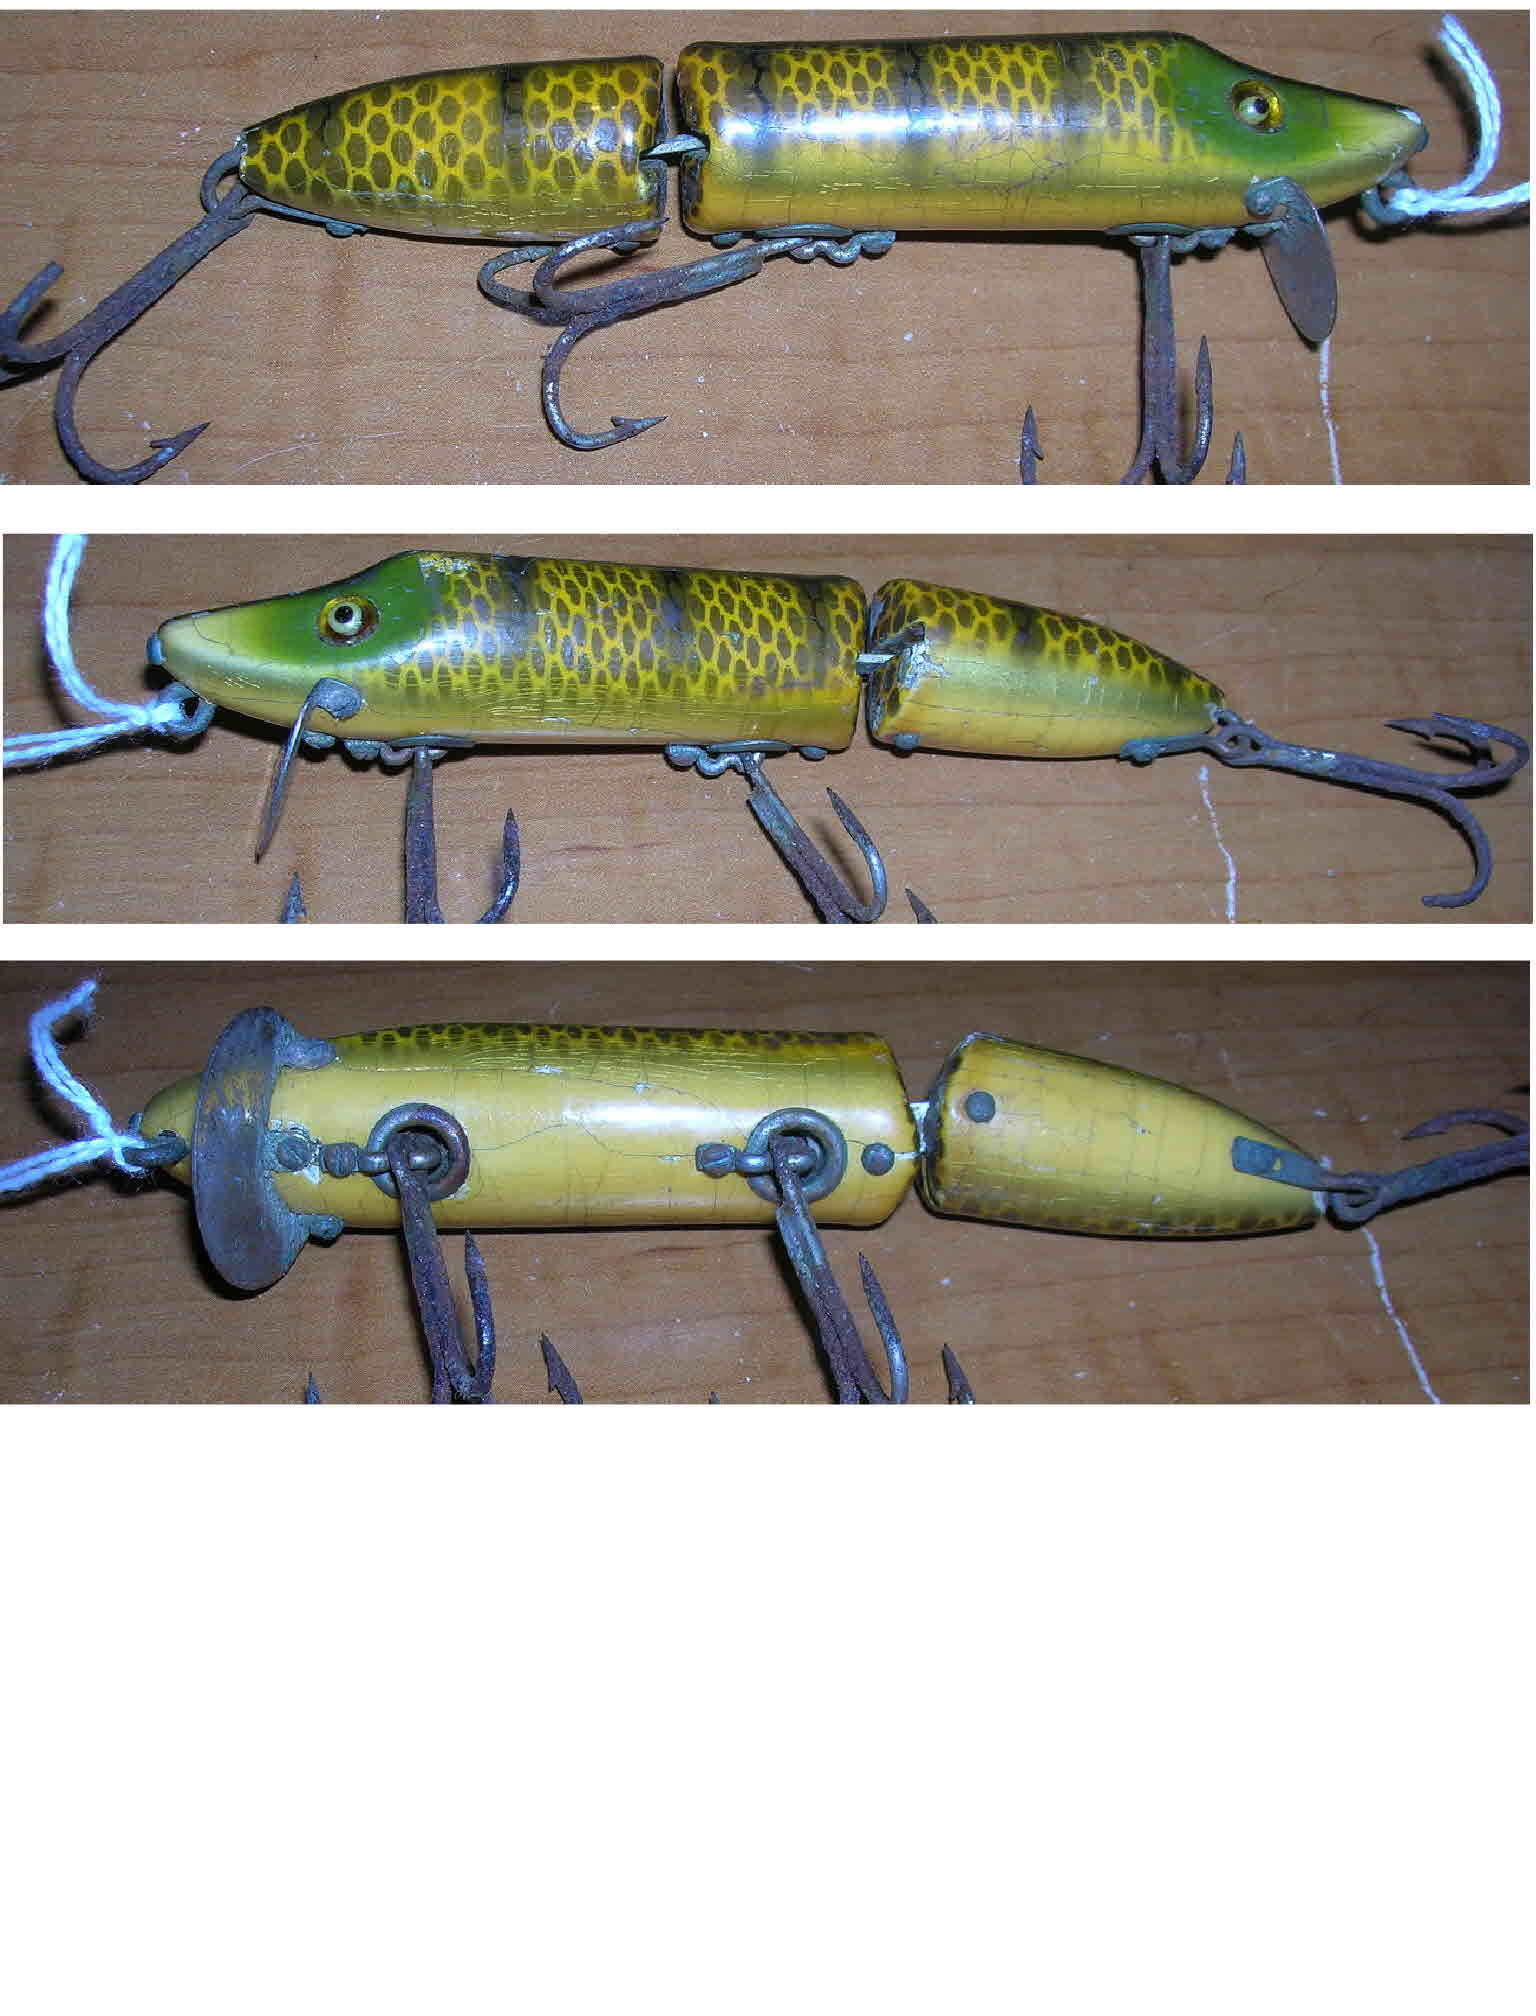 5) Vintage Wood and Jointed Fishing Lures